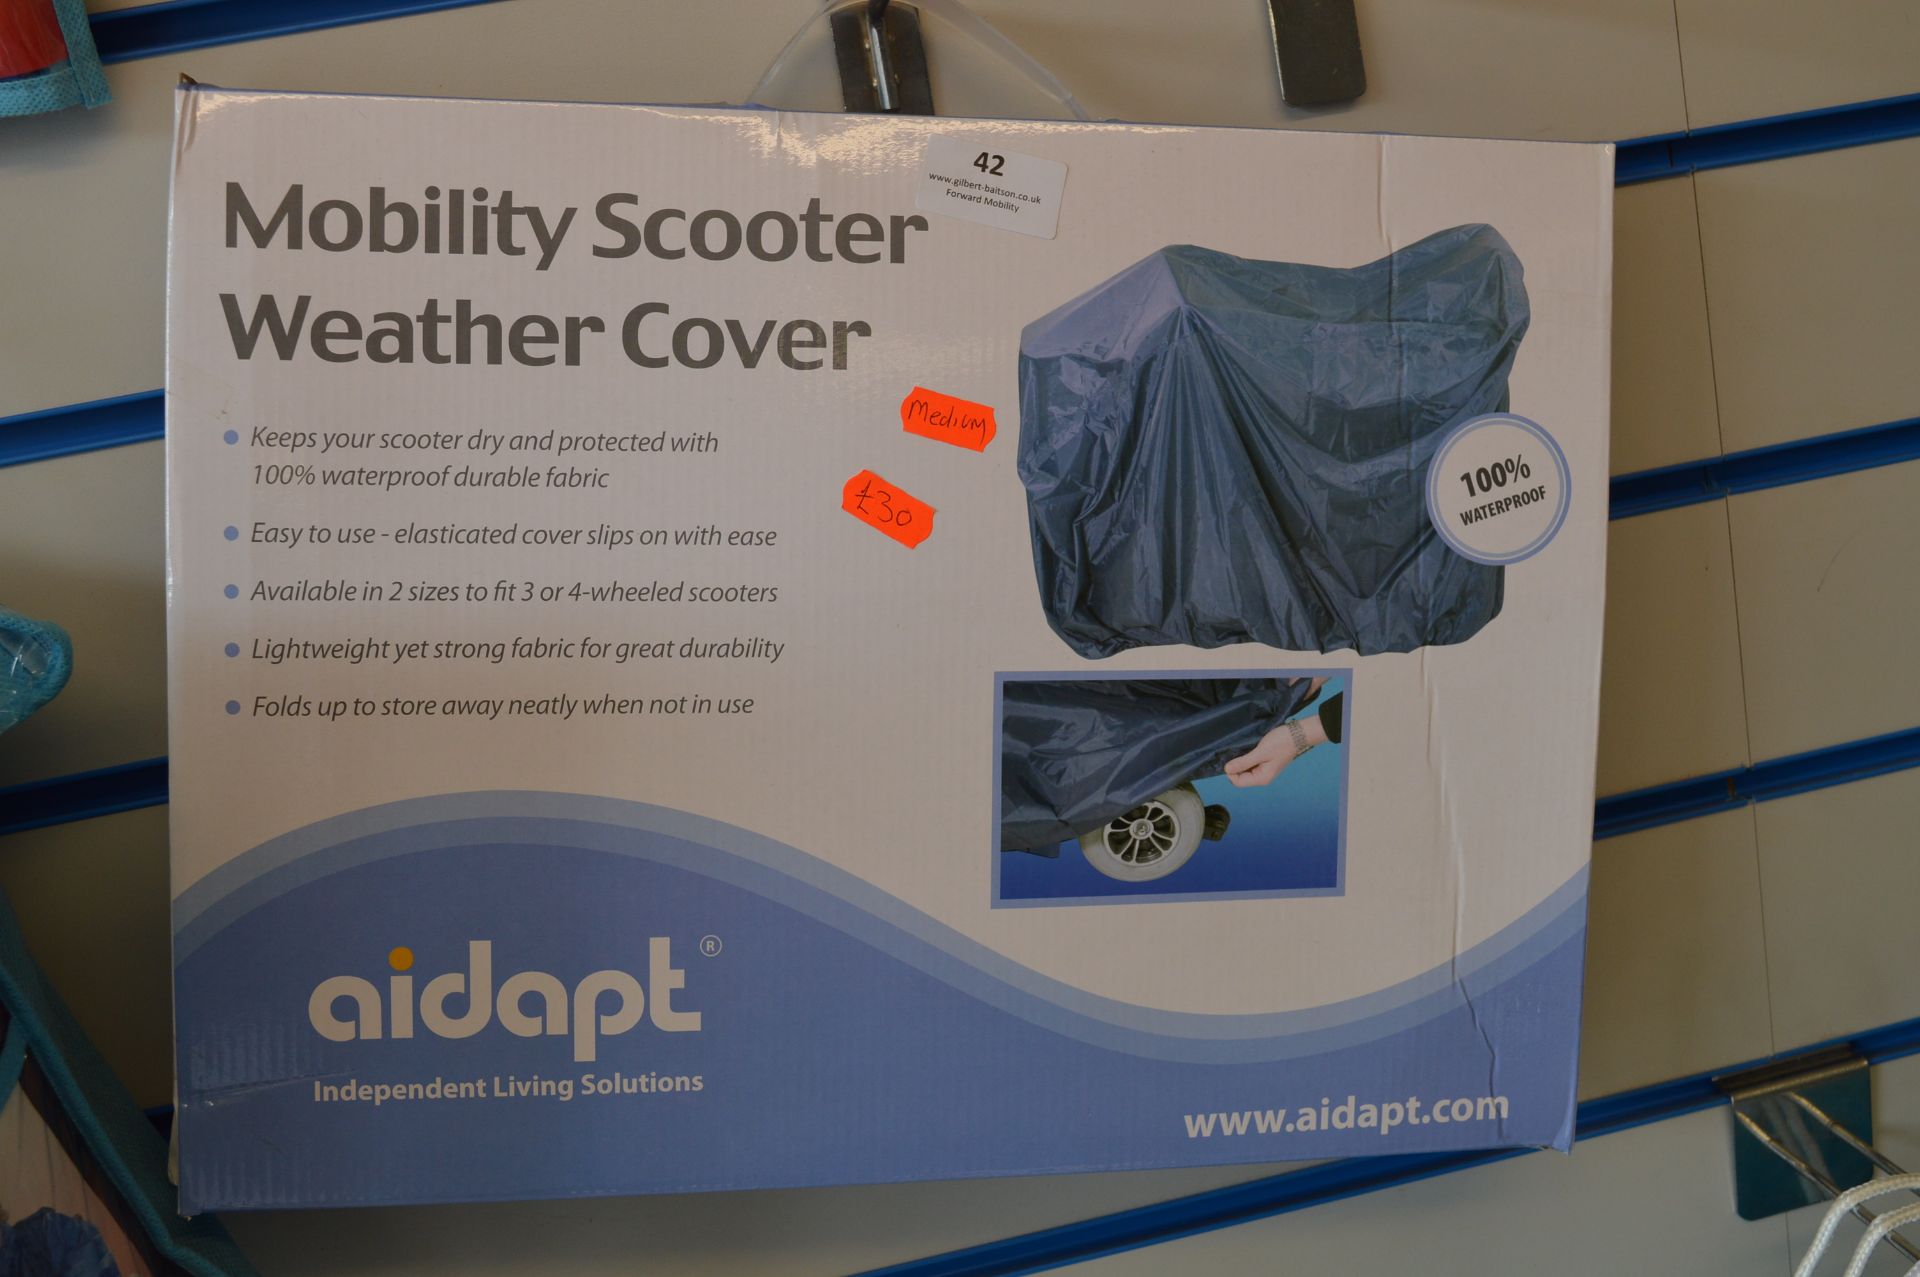 *Mobility Scooter Weather Cover Size: Medium